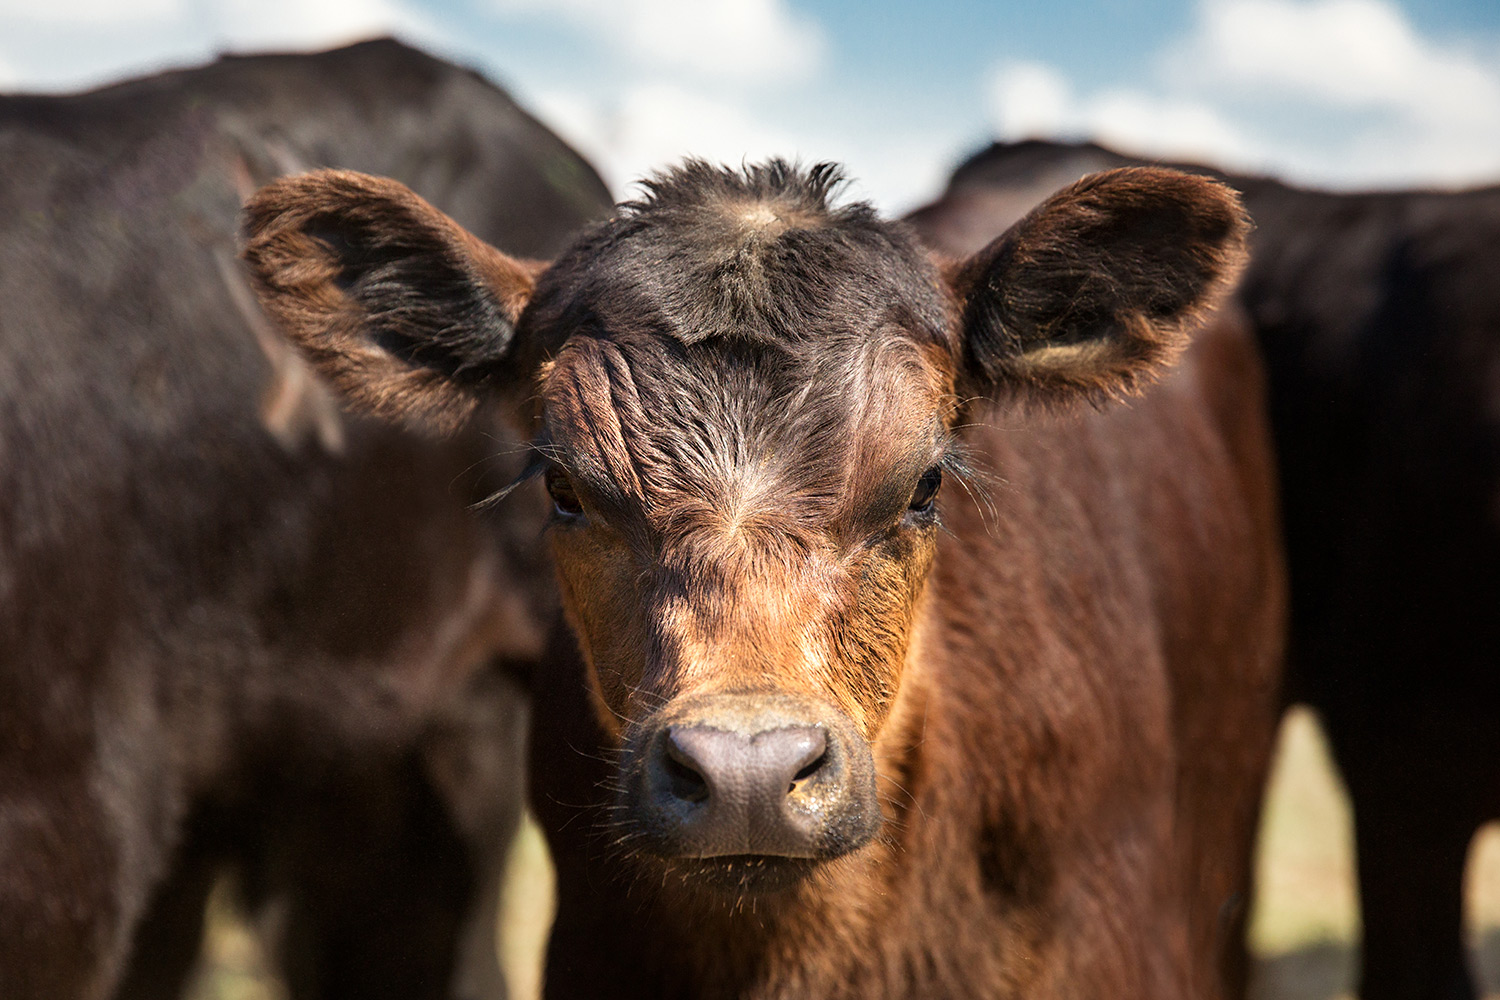 A beautiful young black Angus calf looks into the camera on a sunny day on the ranch.&nbsp;→ Buy a Print